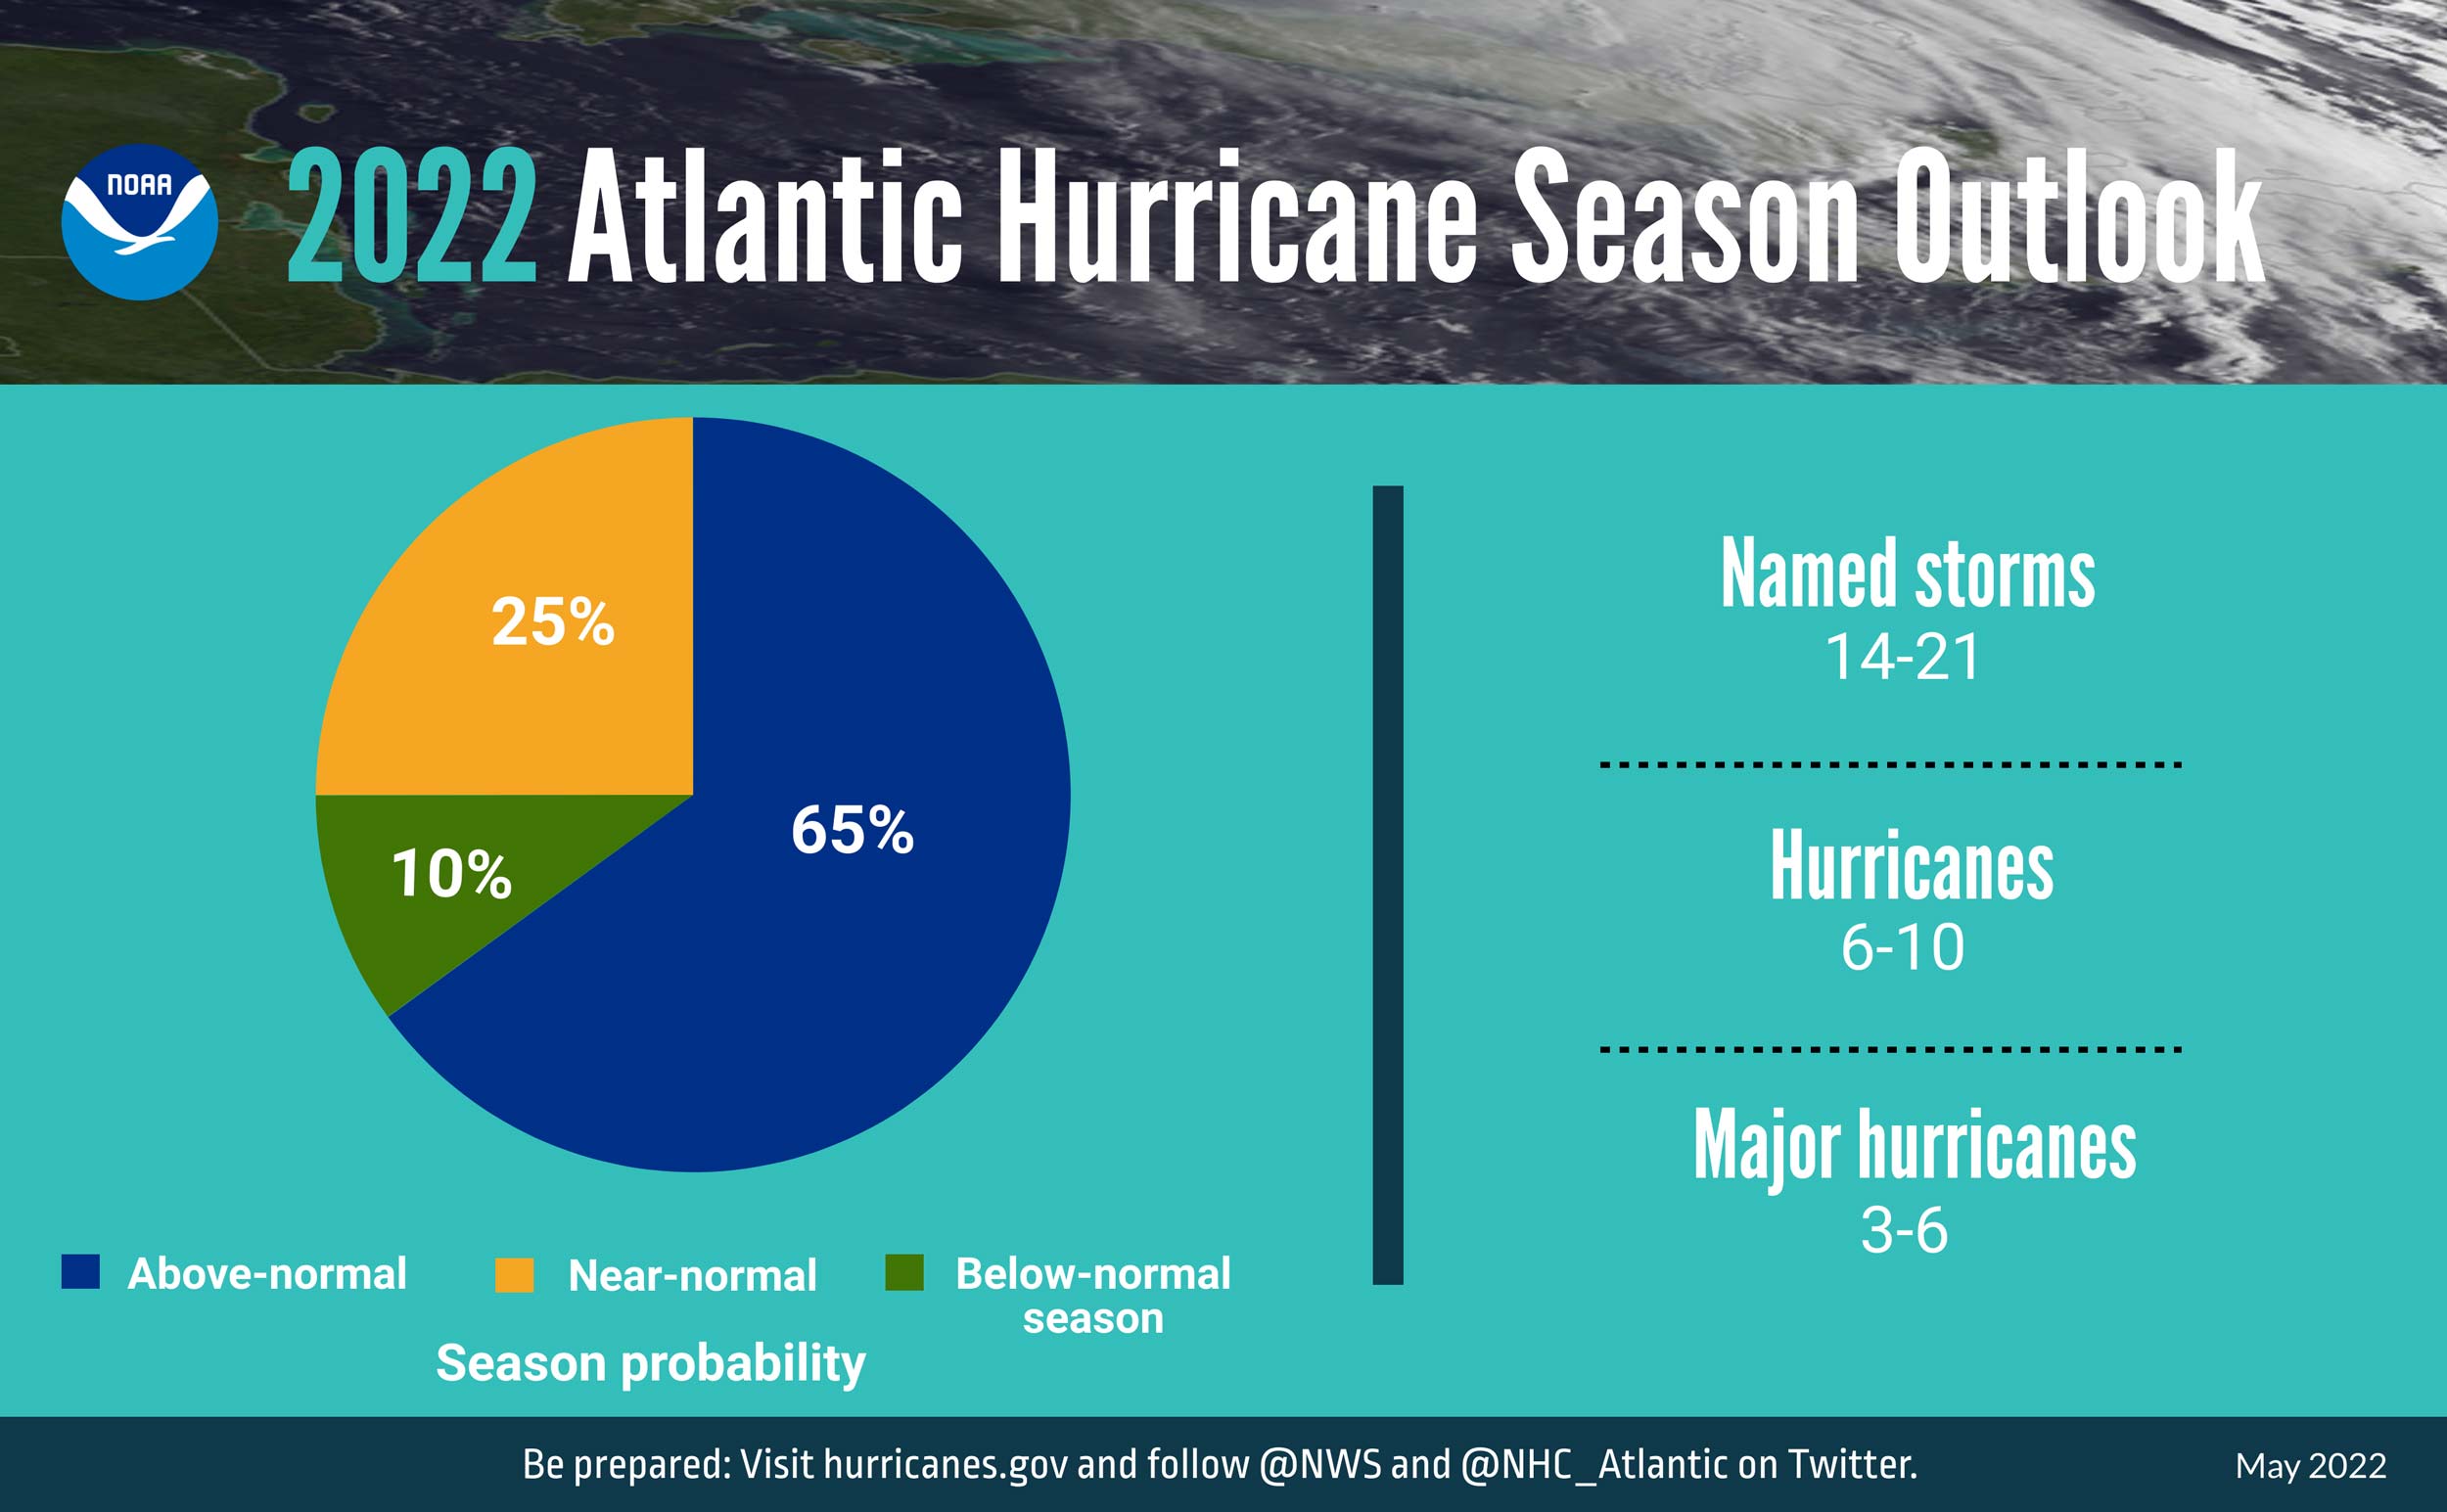 <newsimage1-1-caption>Overall predictions for the 2022 Atlantic hurricane season courtesy of NOAA National Weather Service (NWS)</newsimage1-1-caption>